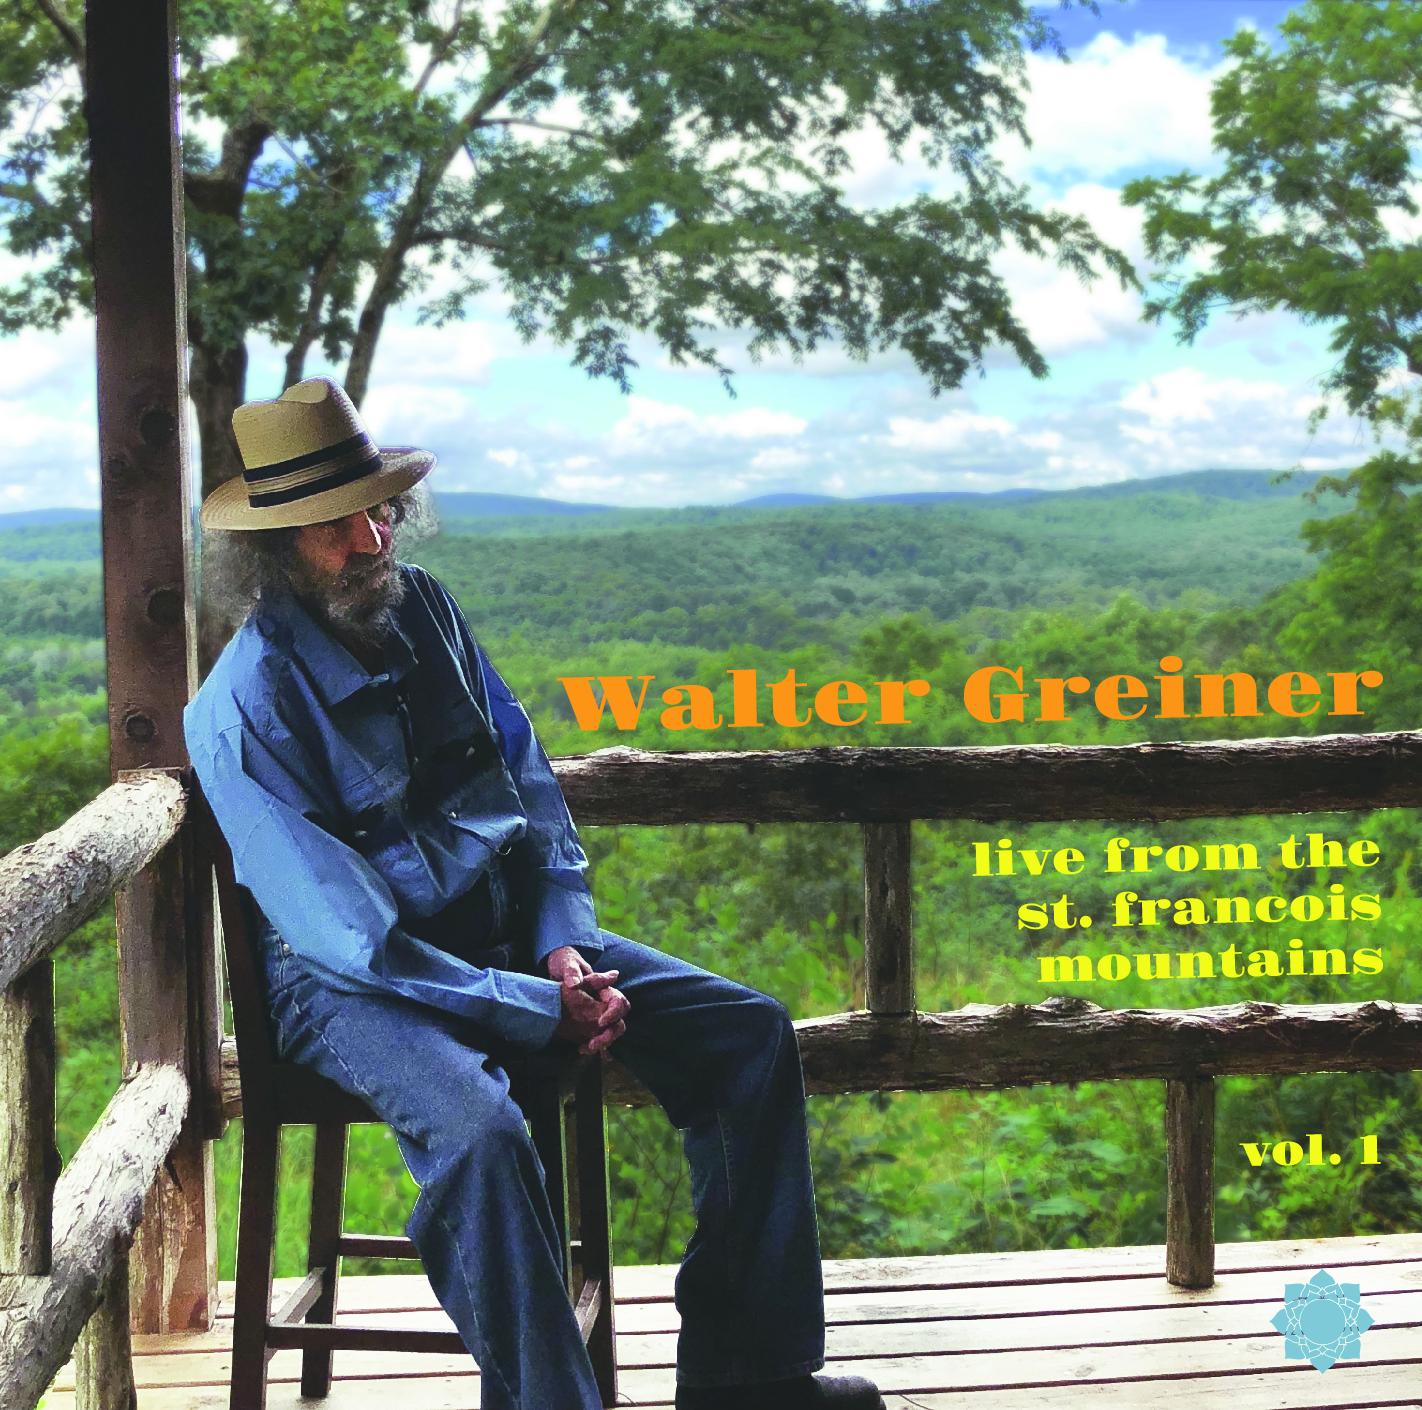 Walter Greiner | "Live from the St. Francois Mountains, Vol. 1"